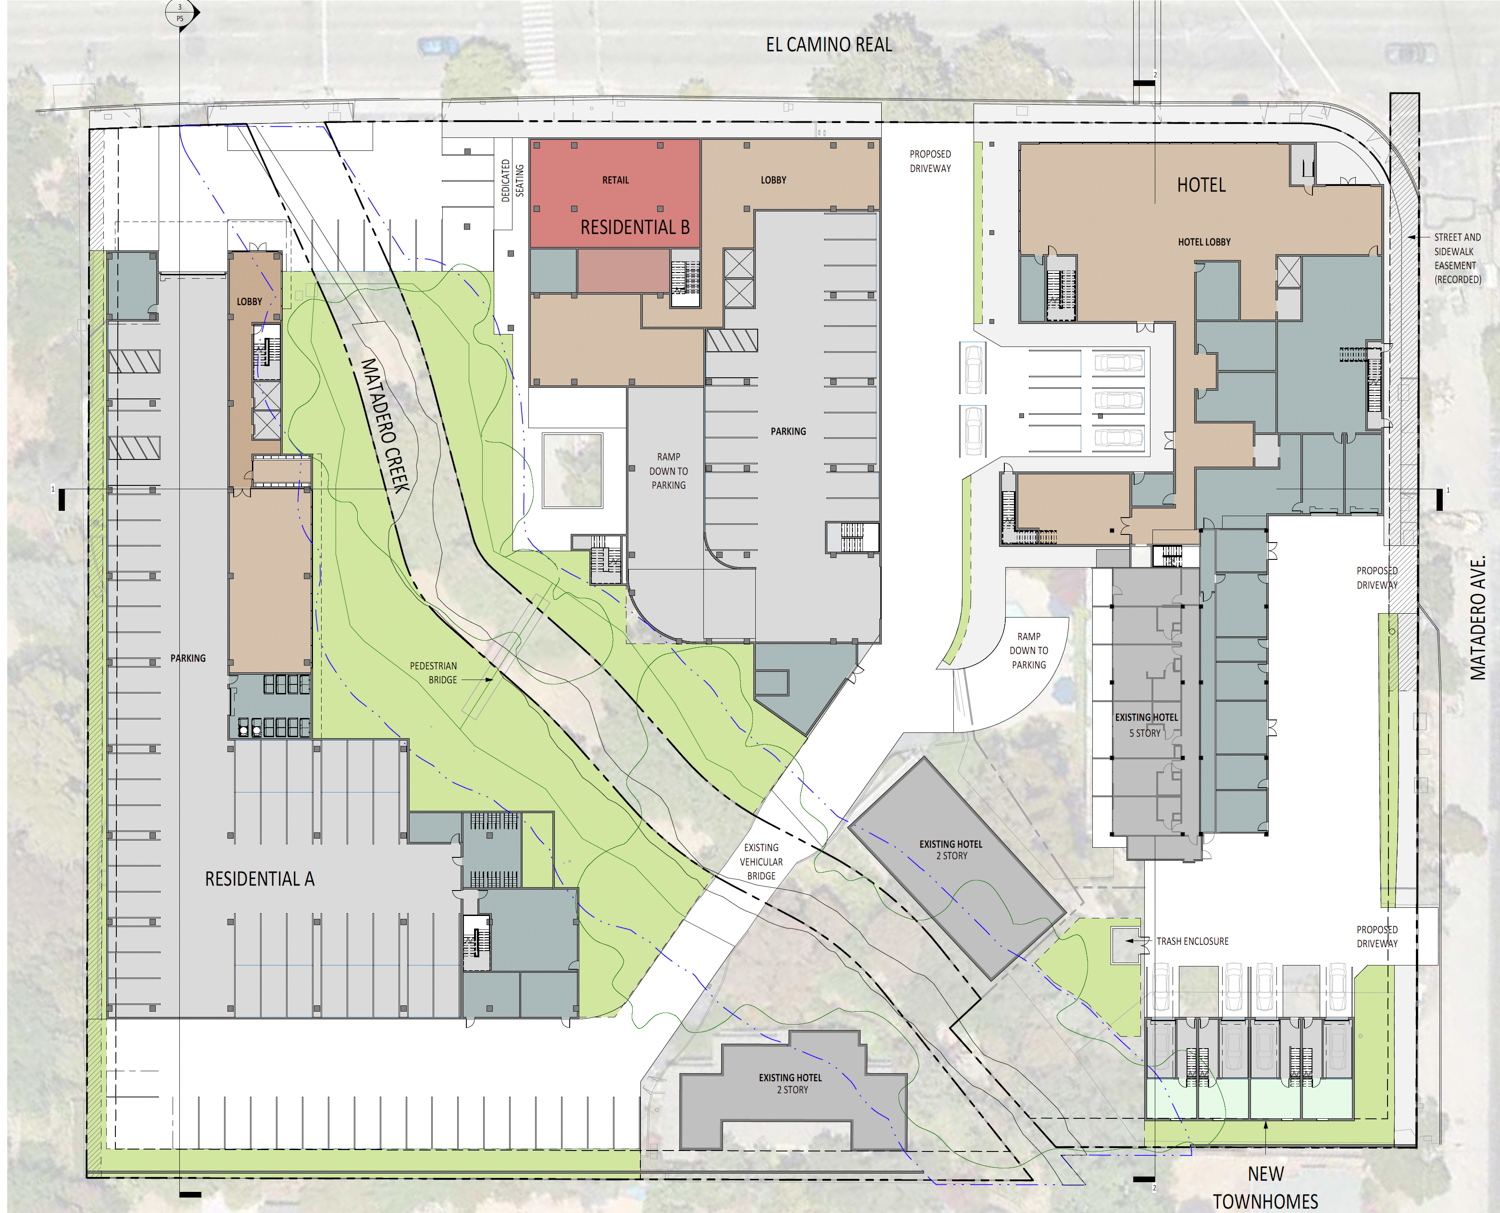 3400 El Camino Real site map, illustration by Lowney Architecture